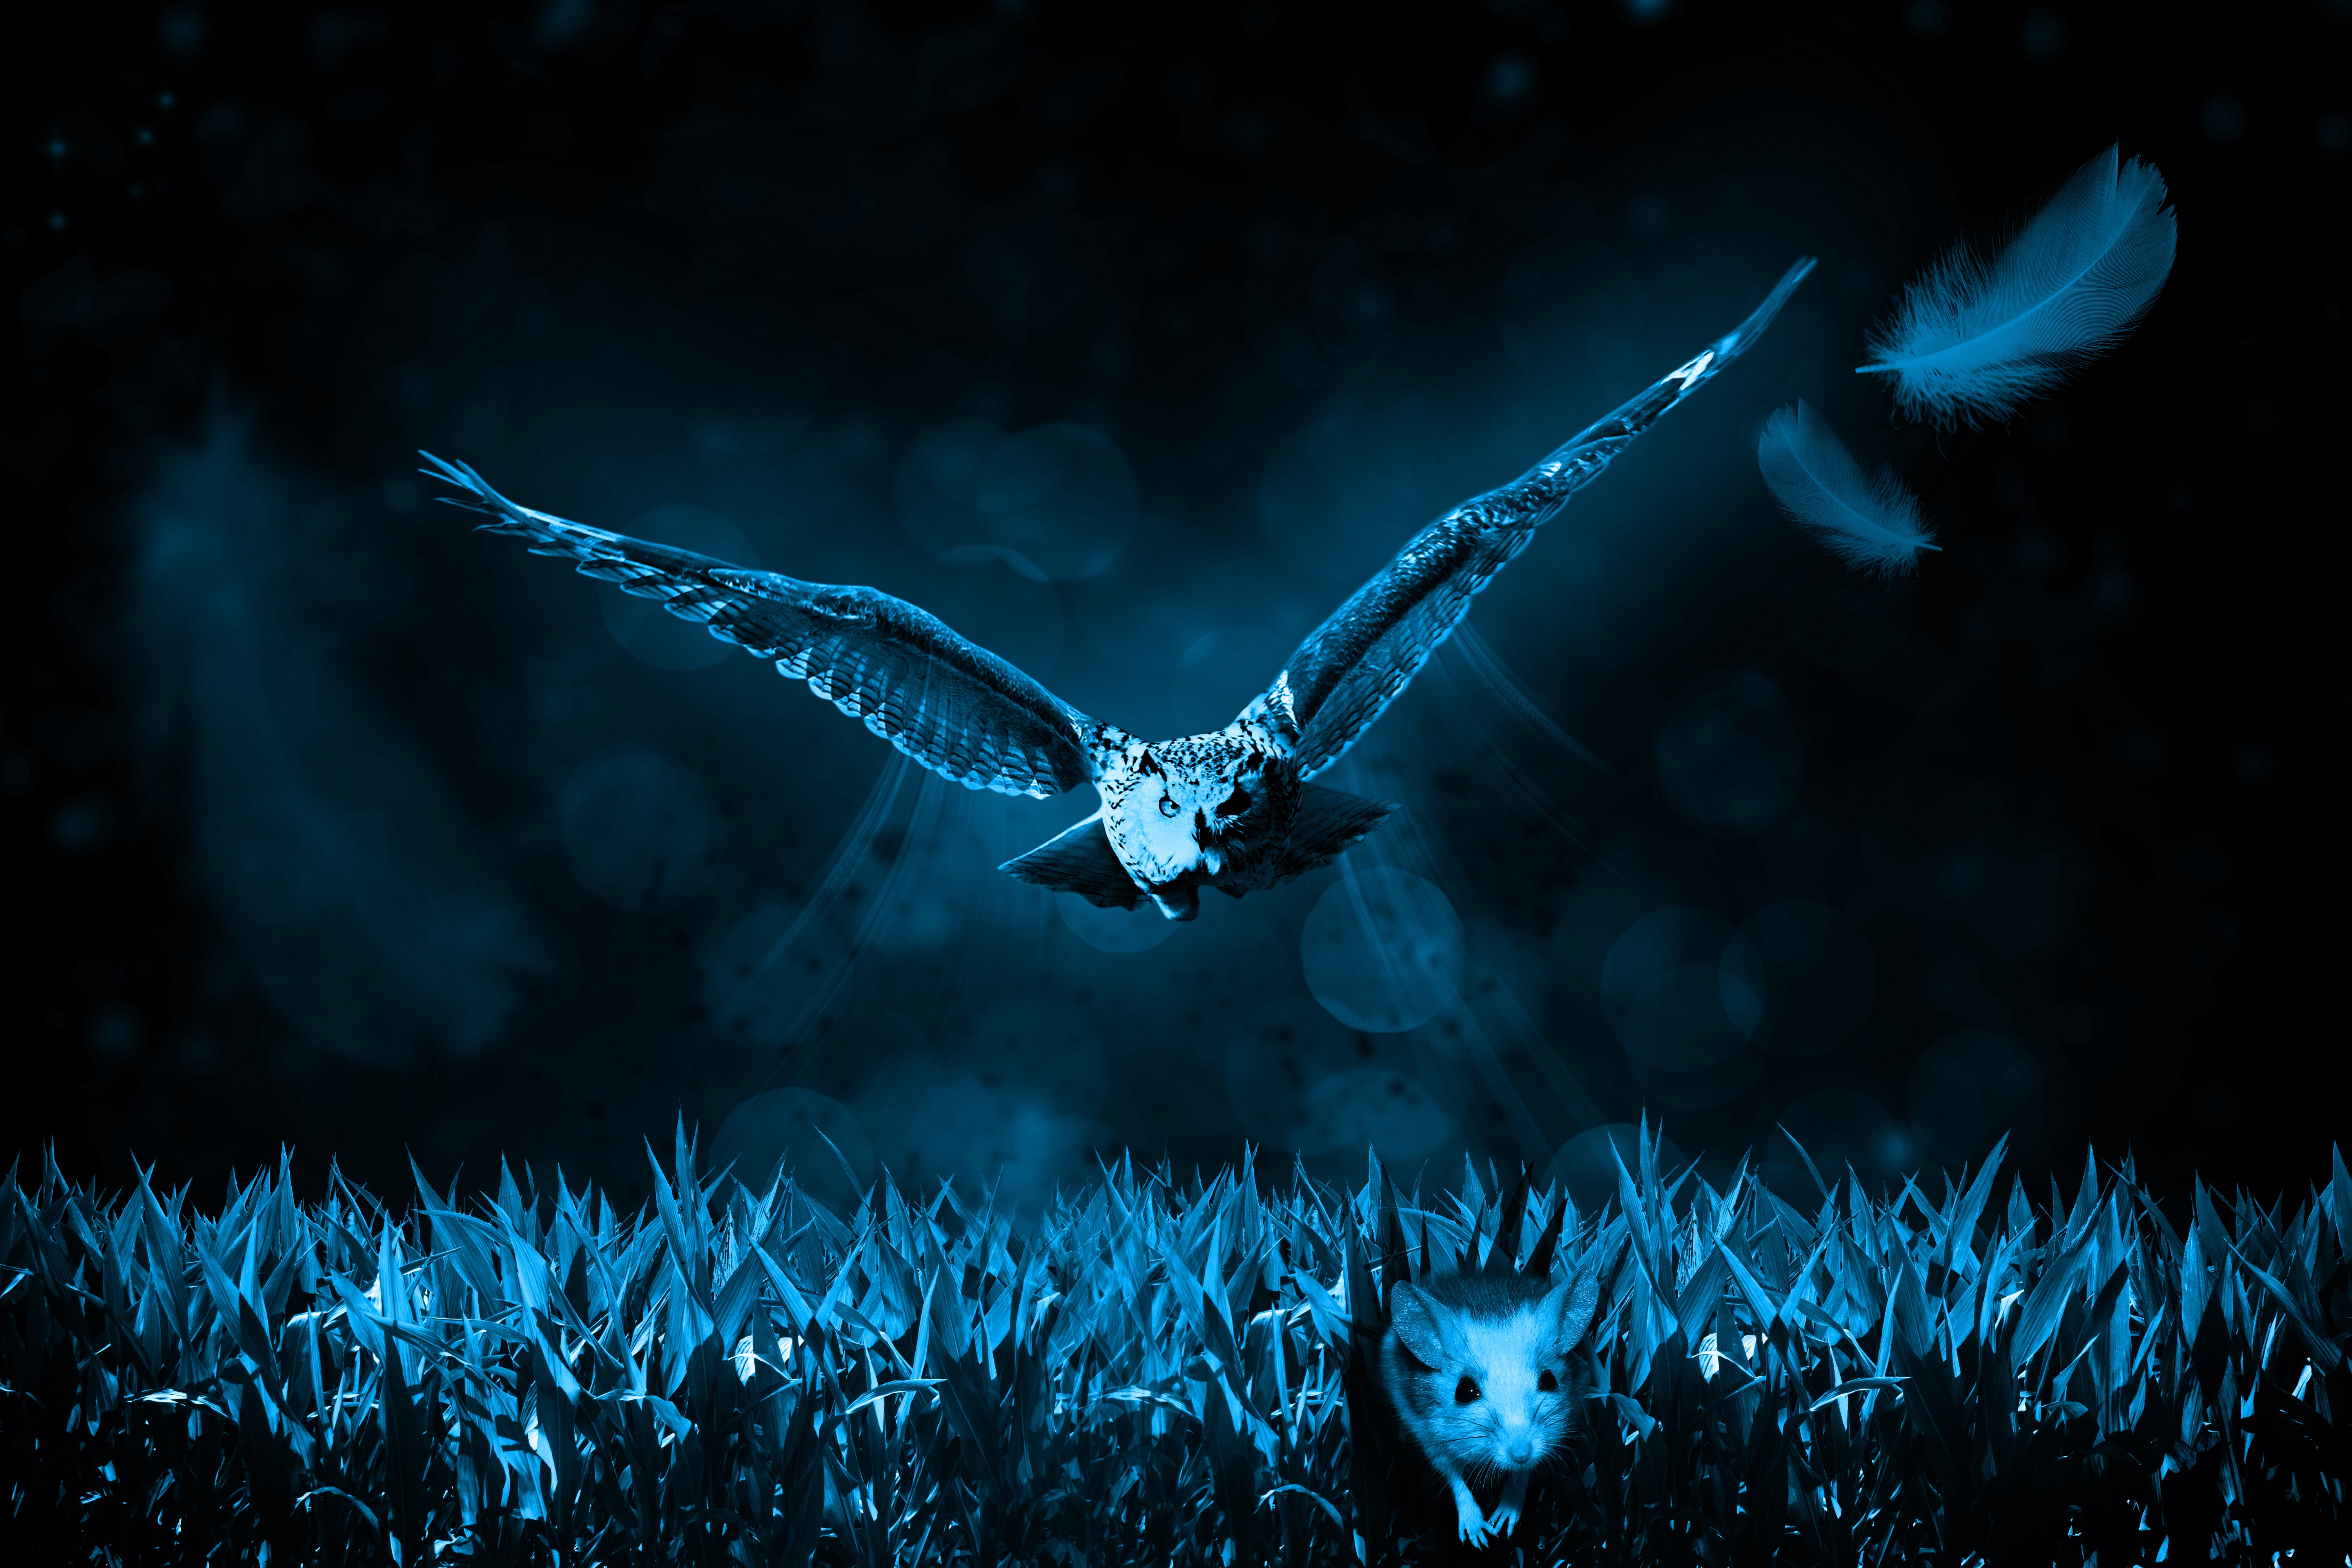 Free photo An owl flies over the grass chasing a mouse in the night under the moonlight